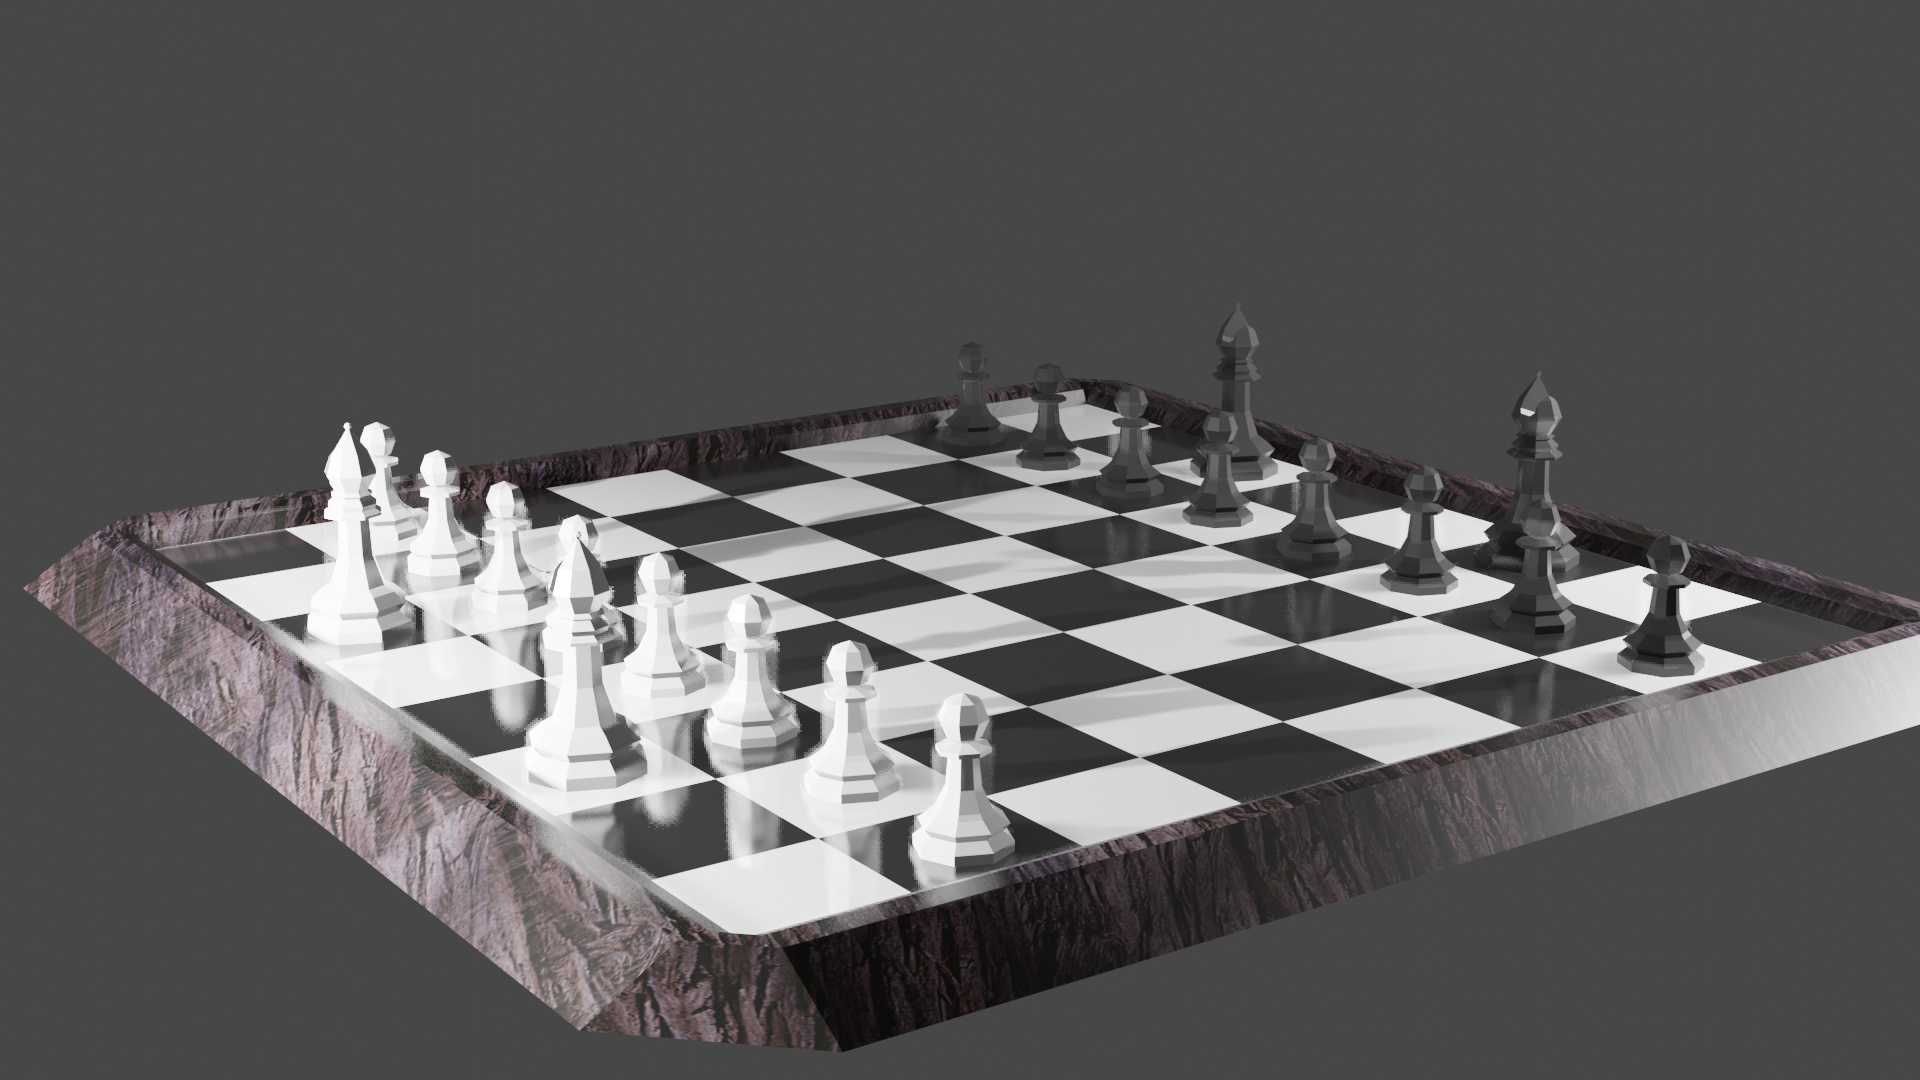 Low%20Poly%20Chess%20Set%20Texture%20Render